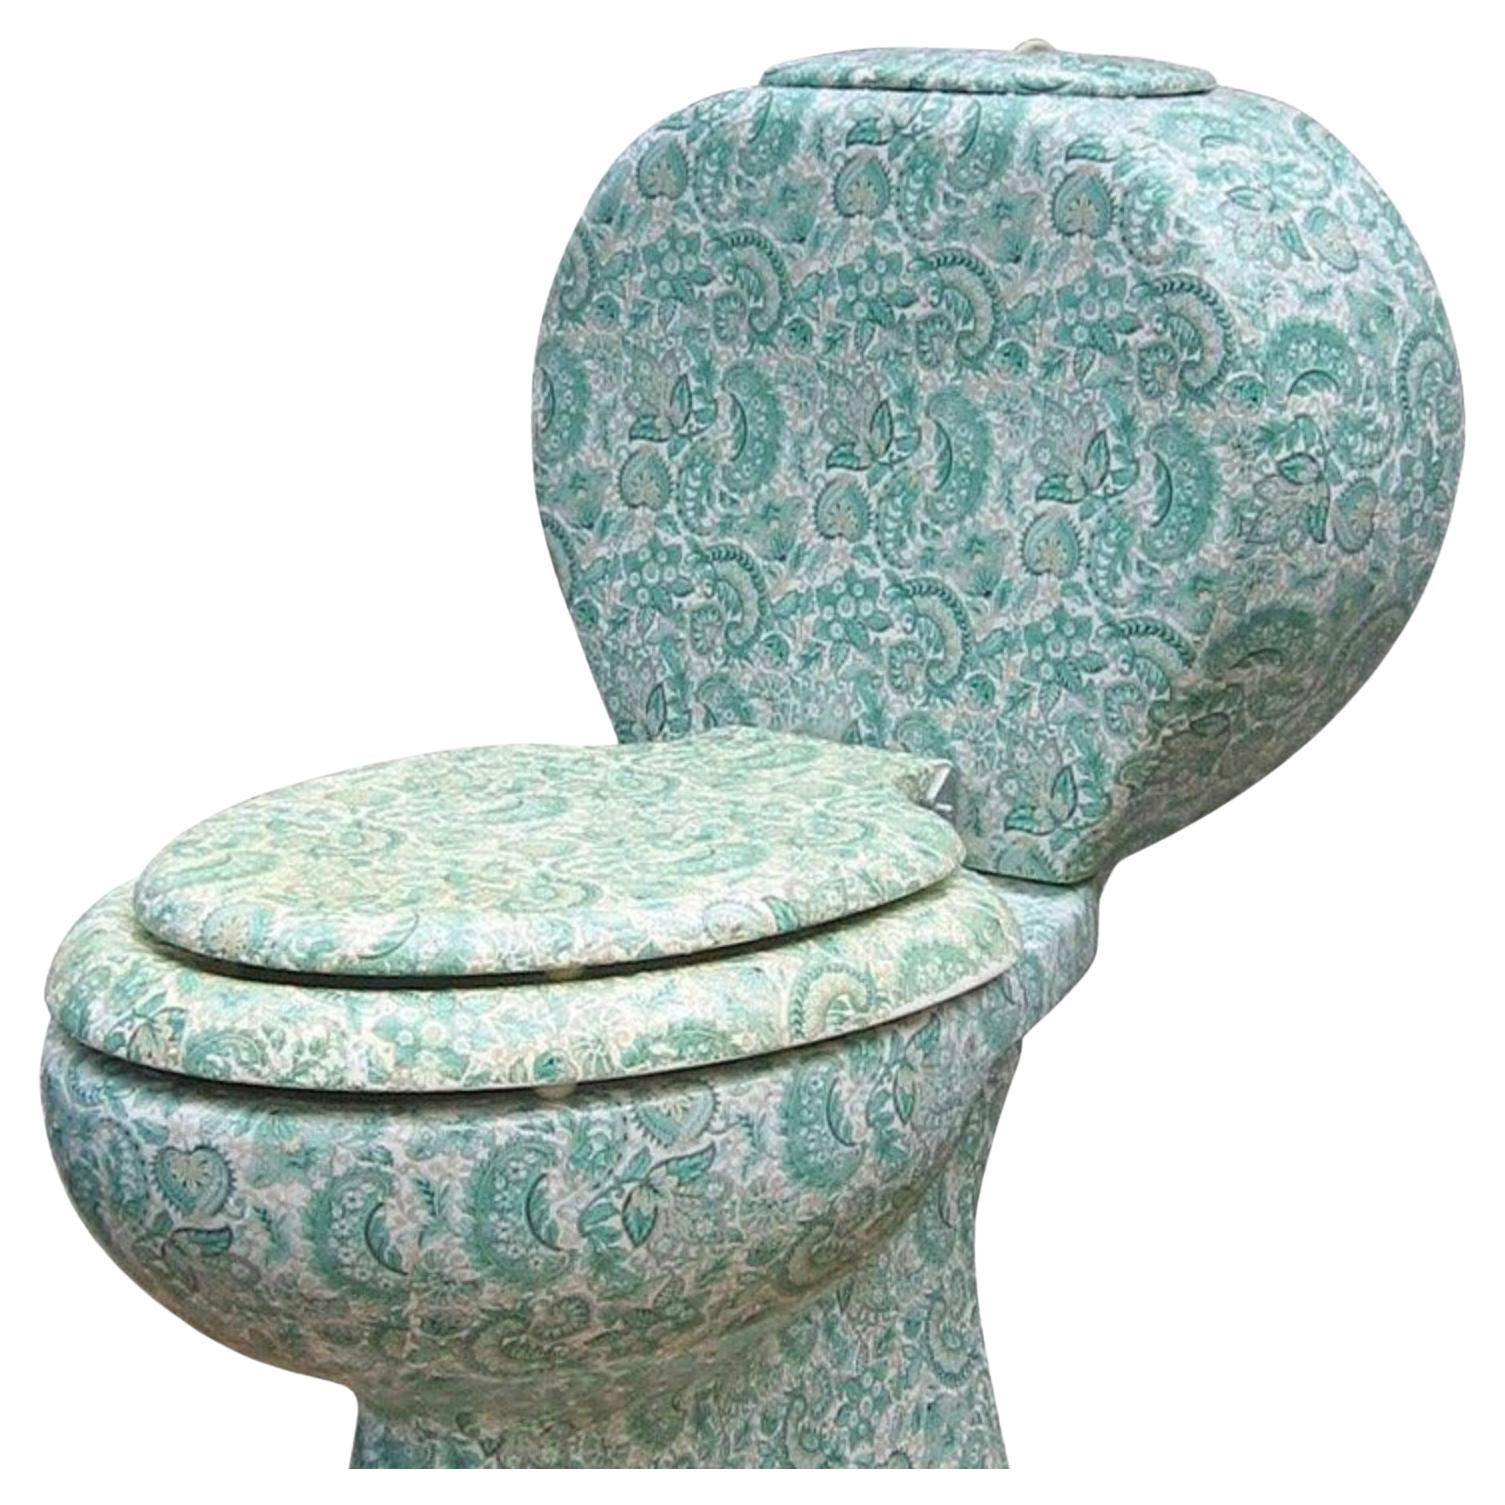 Midcentury hand painted Richard Ginori porcelain commode, toilet, water closet. Fabulous custom green paisley hand painted porcelain, 1960s, made in Italy. Measures: 18